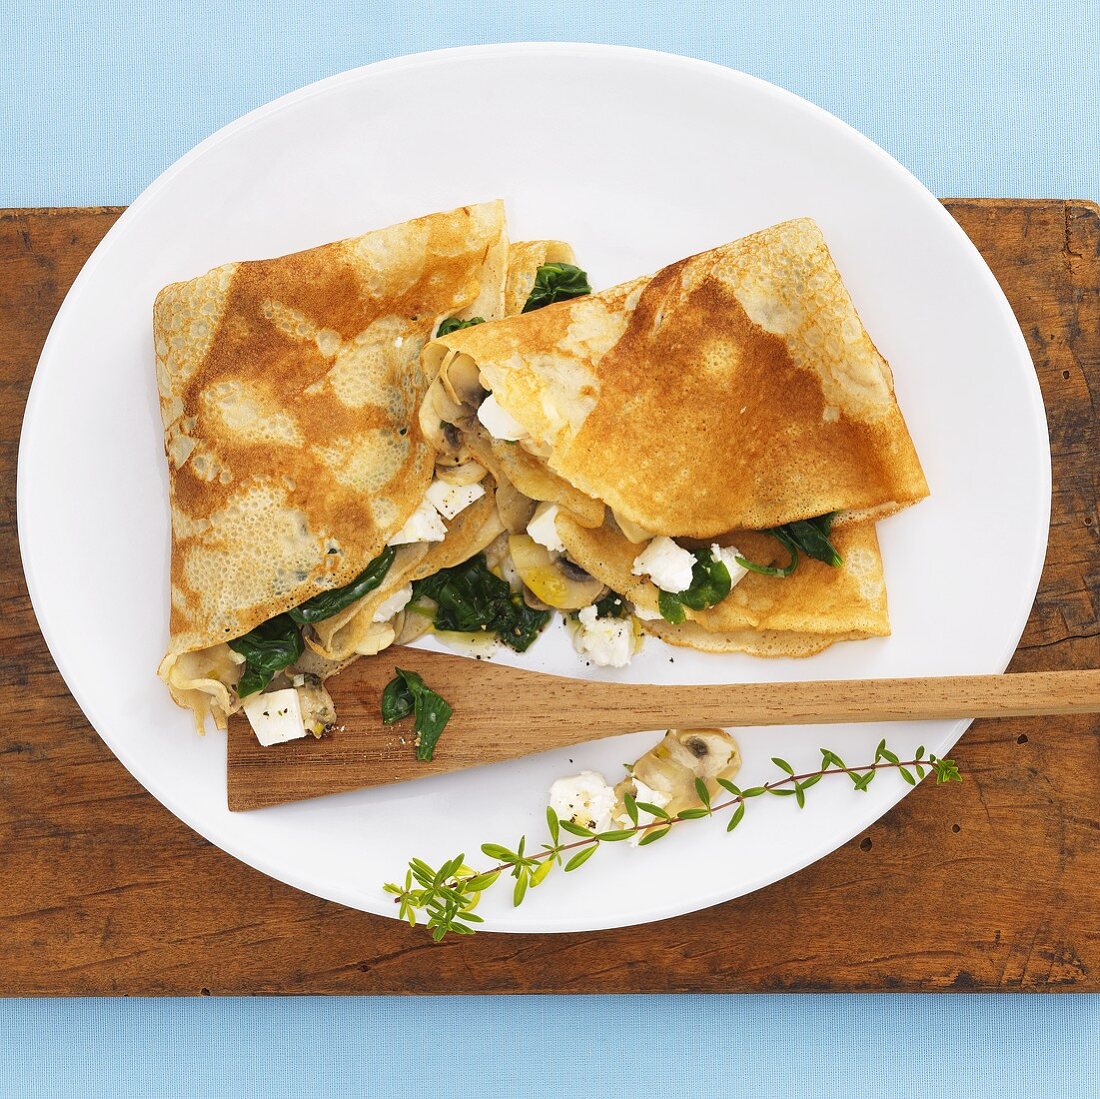 Buckwheat crêpes with vegetables and fresh goat's cheese